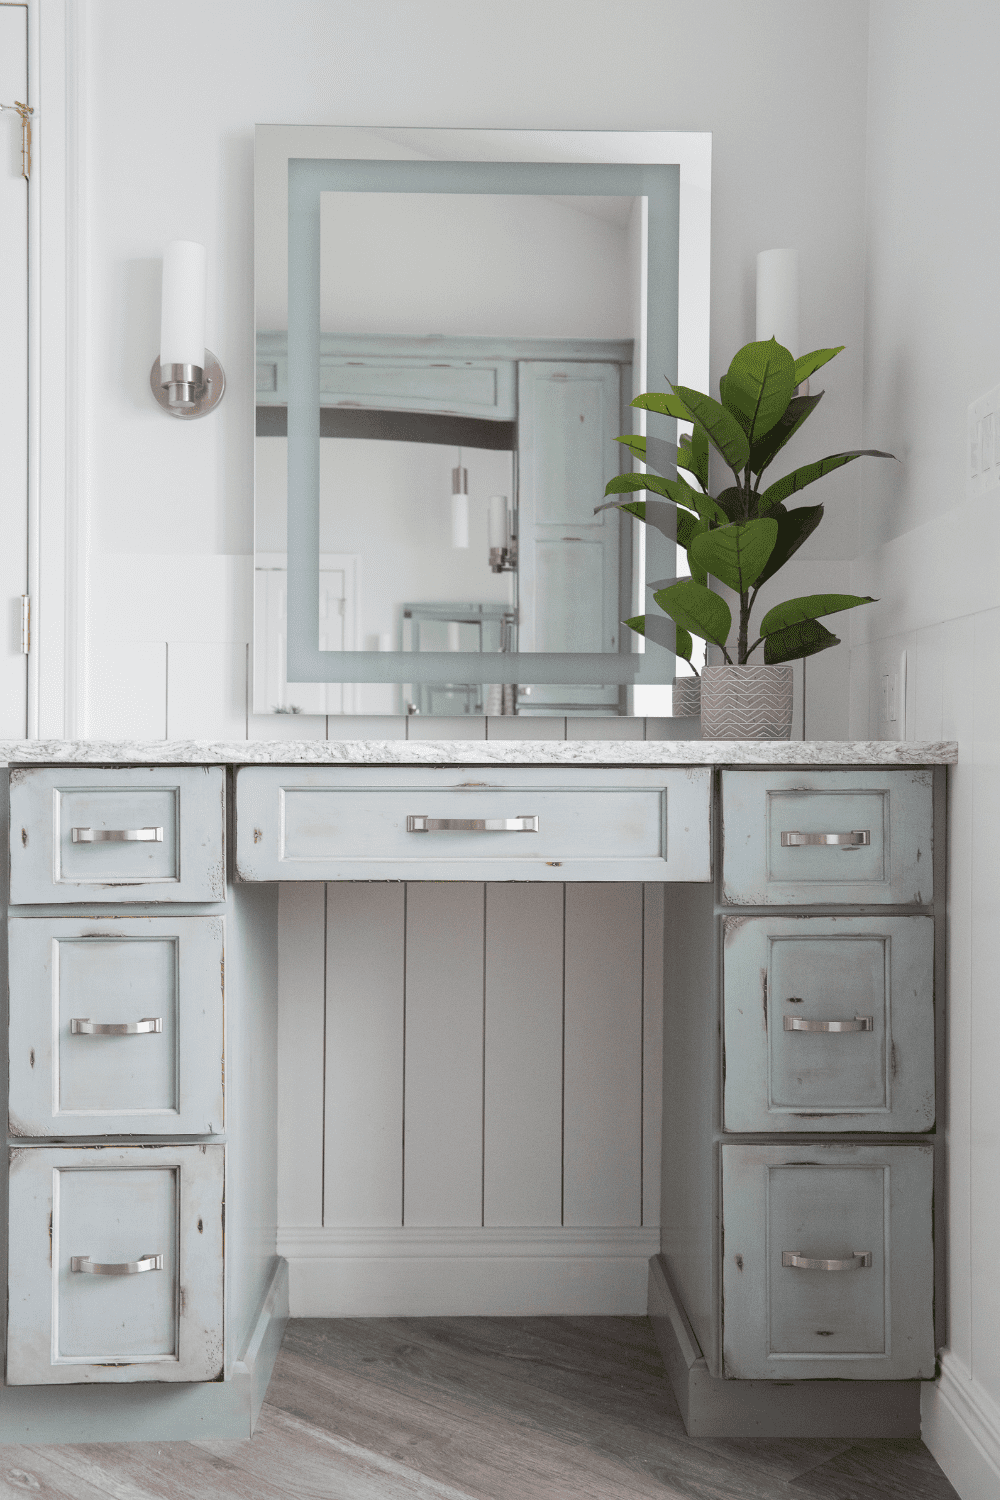 Nicholas Design Build | A master bathroom vanity with a mirror and drawers.